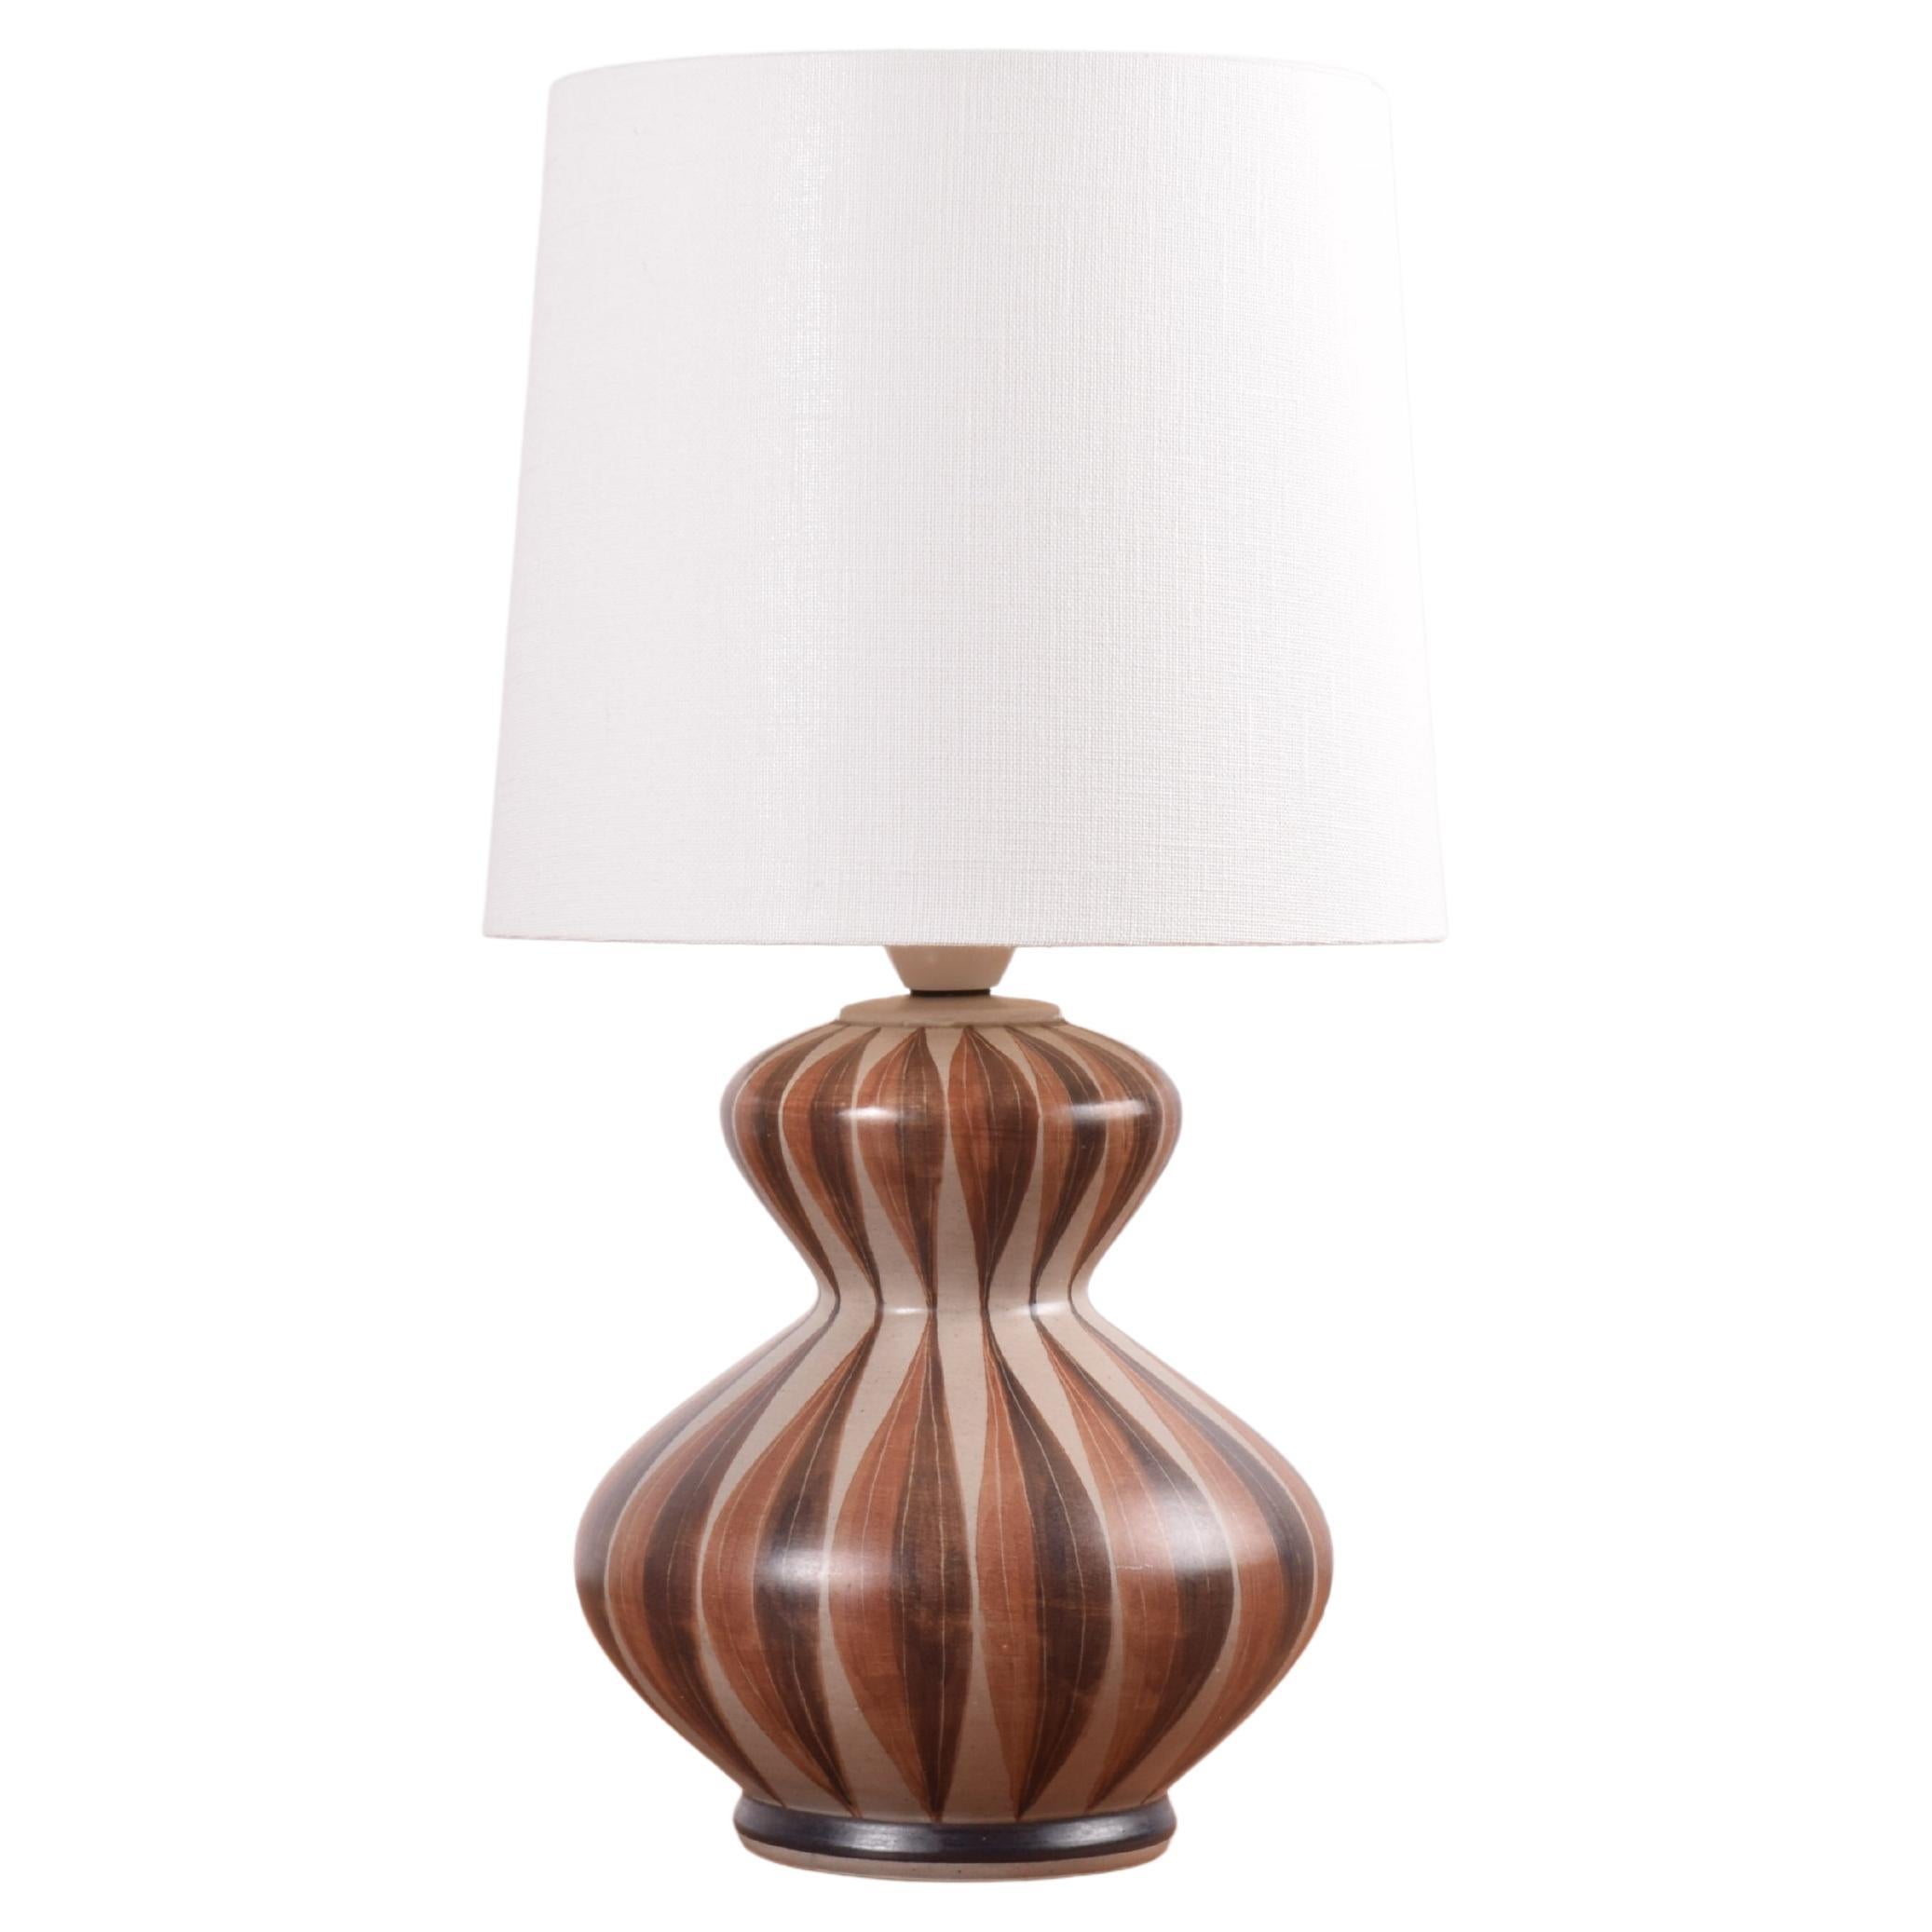 Danish Sculptural Table Lamp with Brown Stripes by Eva & Johannes Andersen 1960s For Sale